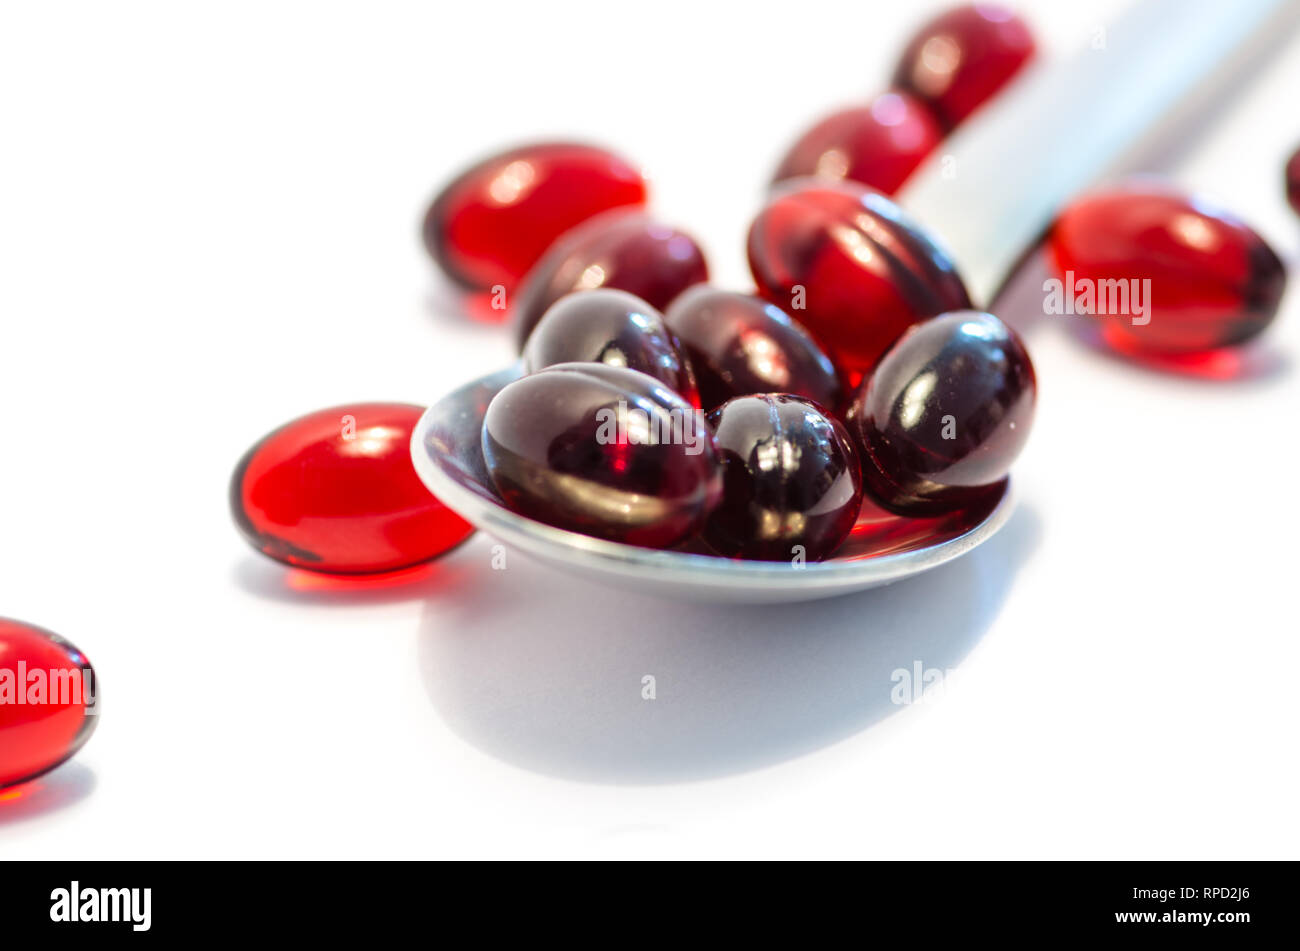 Supplement used in fitness and training. Amminoacids, Omega3, Protein and scoops Stock Photo